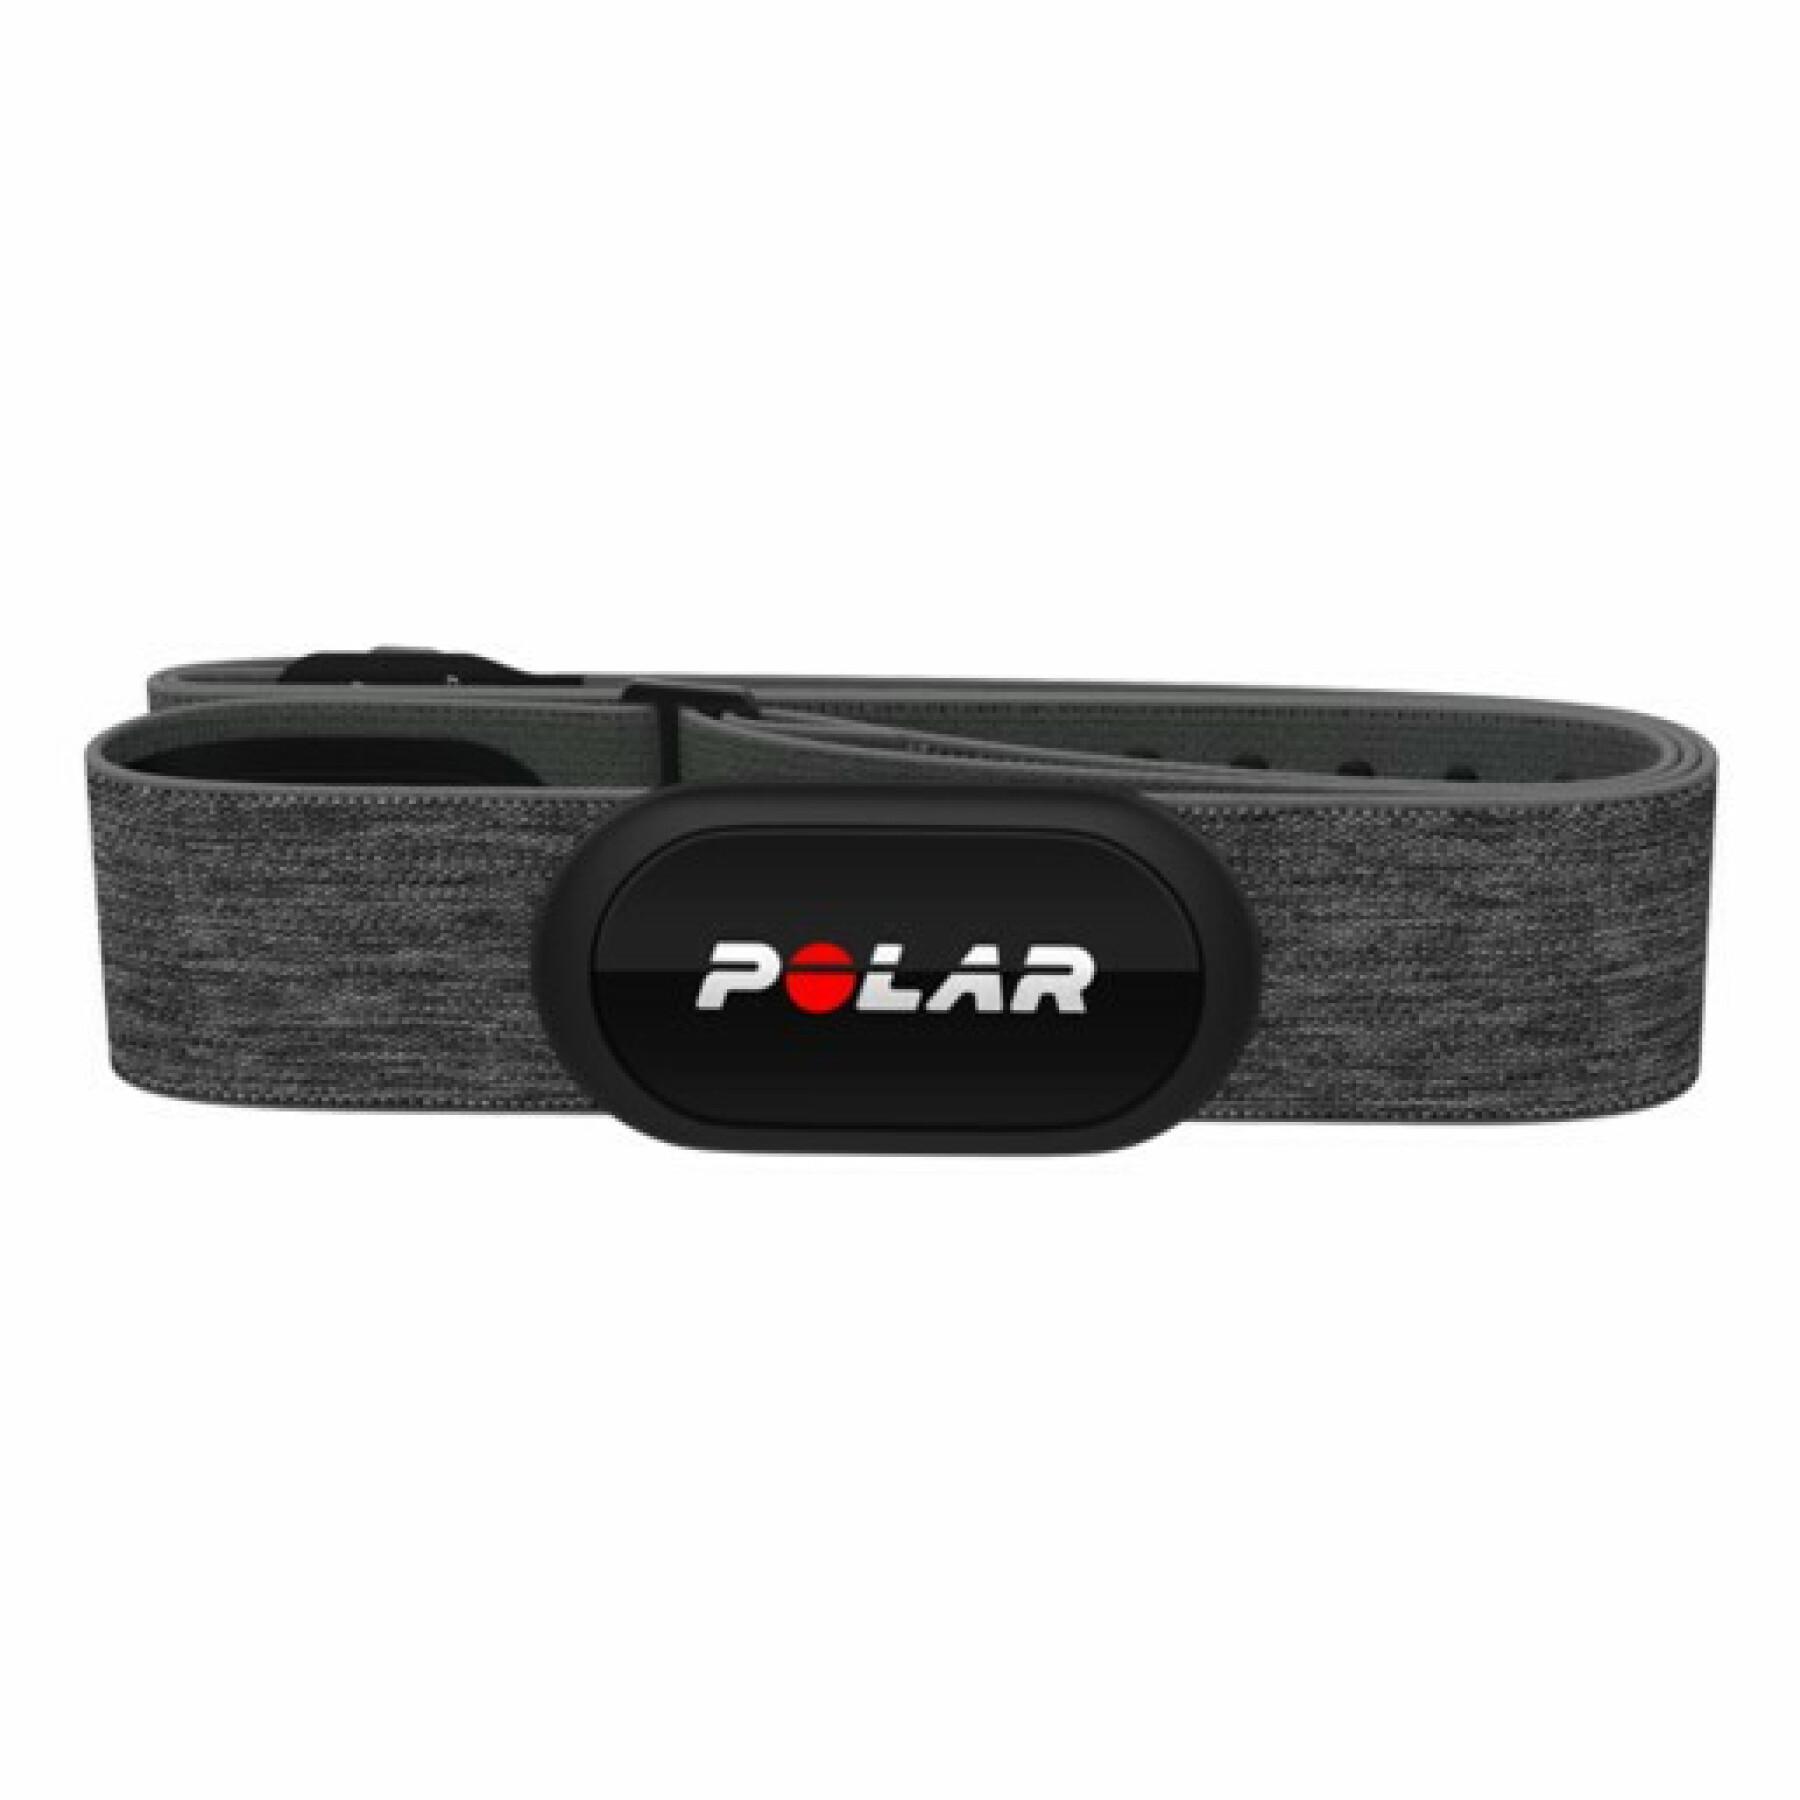 Connected fitness watch Polar Ignite S